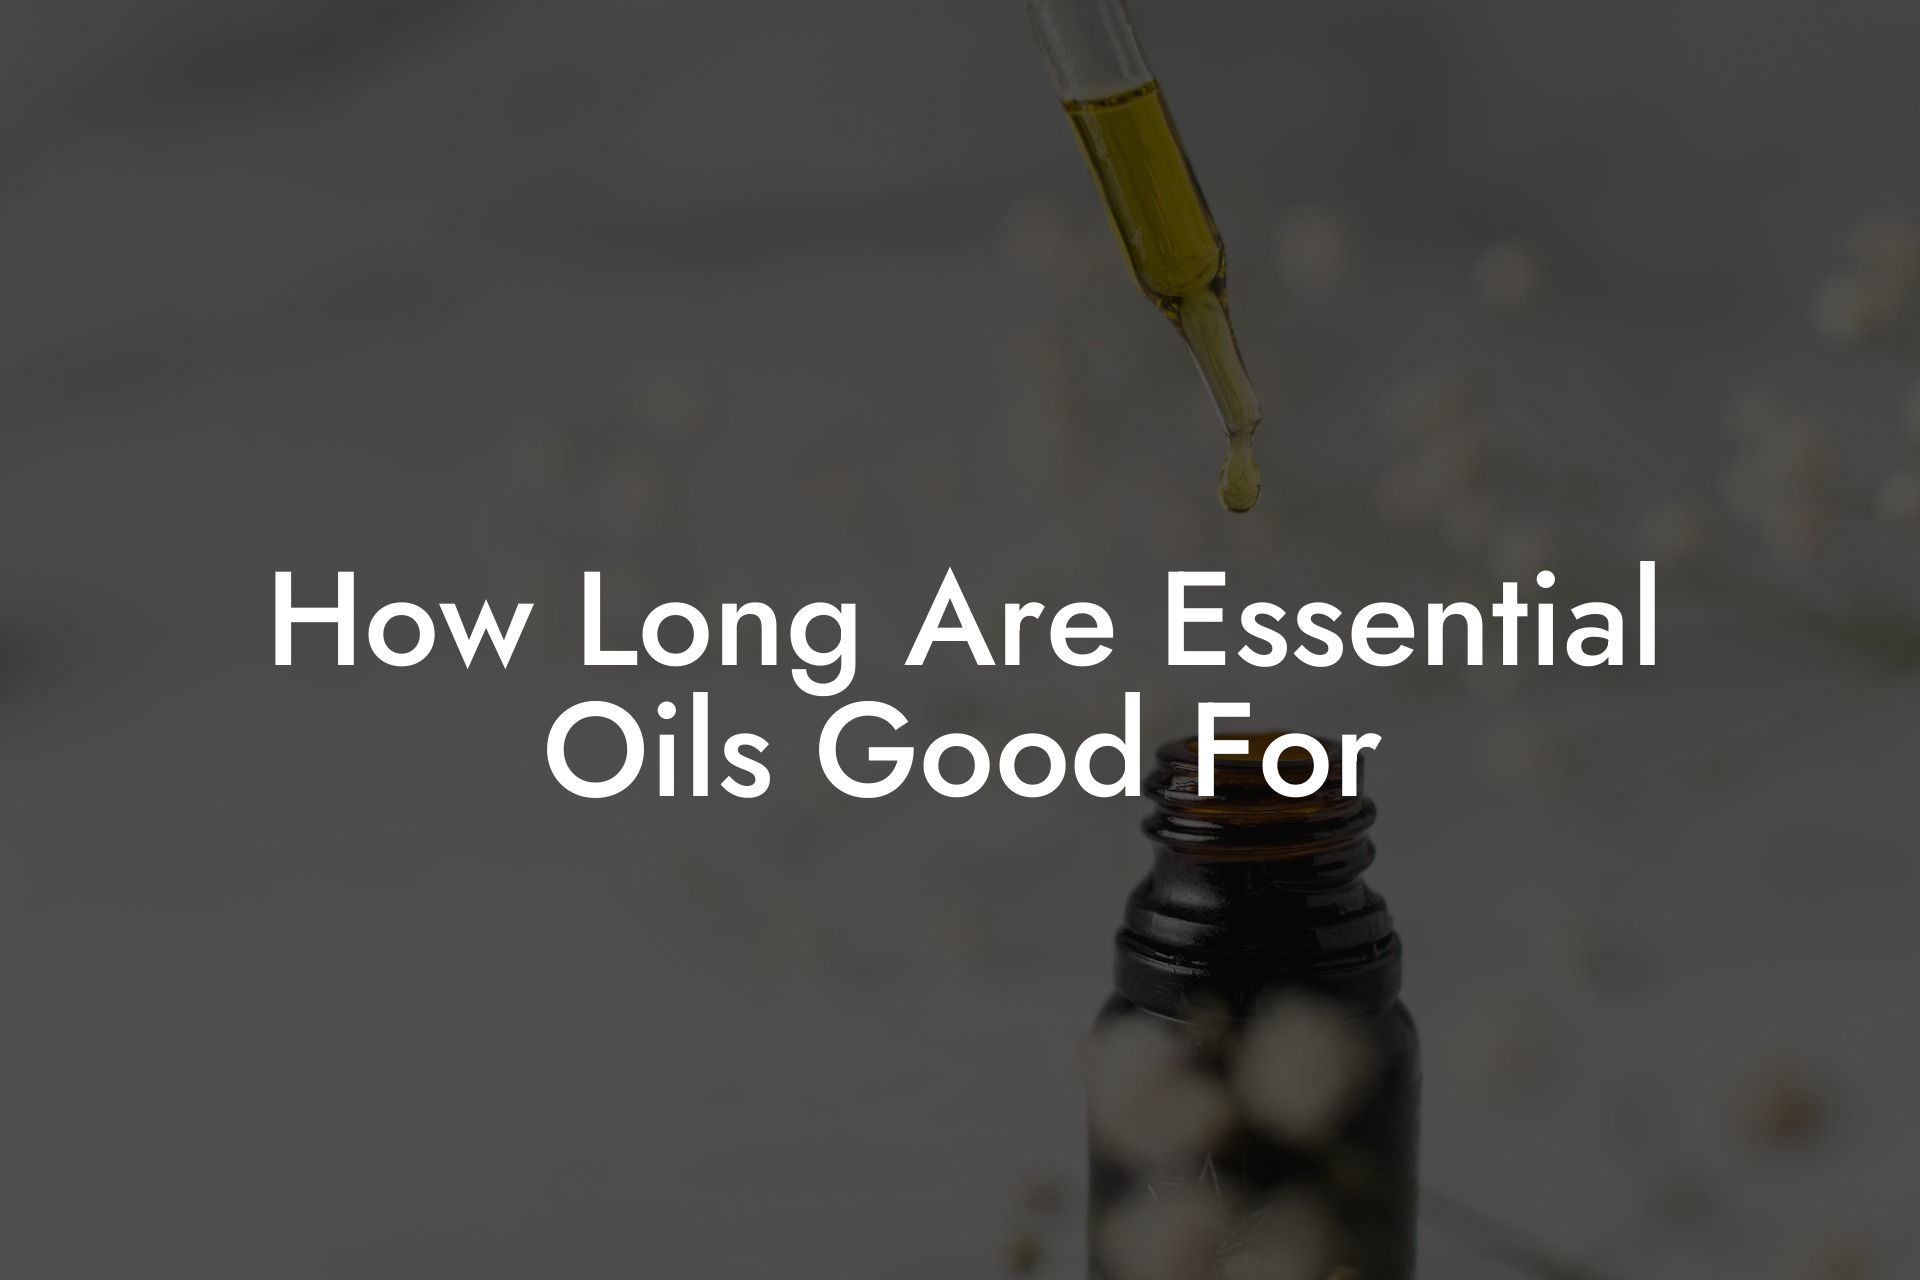 How Long Are Essential Oils Good For